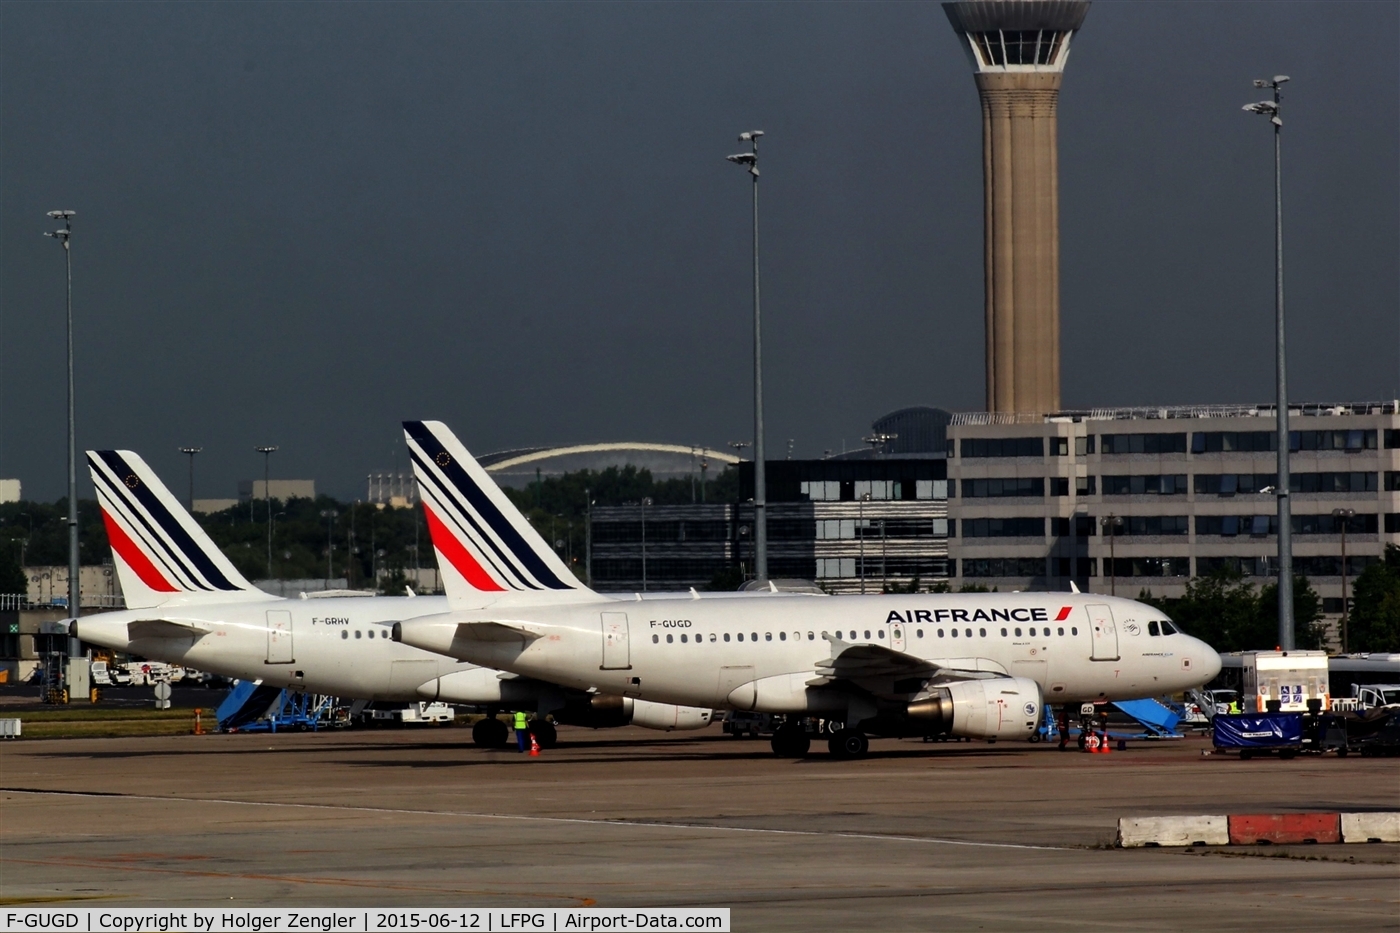 F-GUGD, 2003 Airbus A318-111 C/N 2081, Any idea where in the world, exept France, A318 are in use?